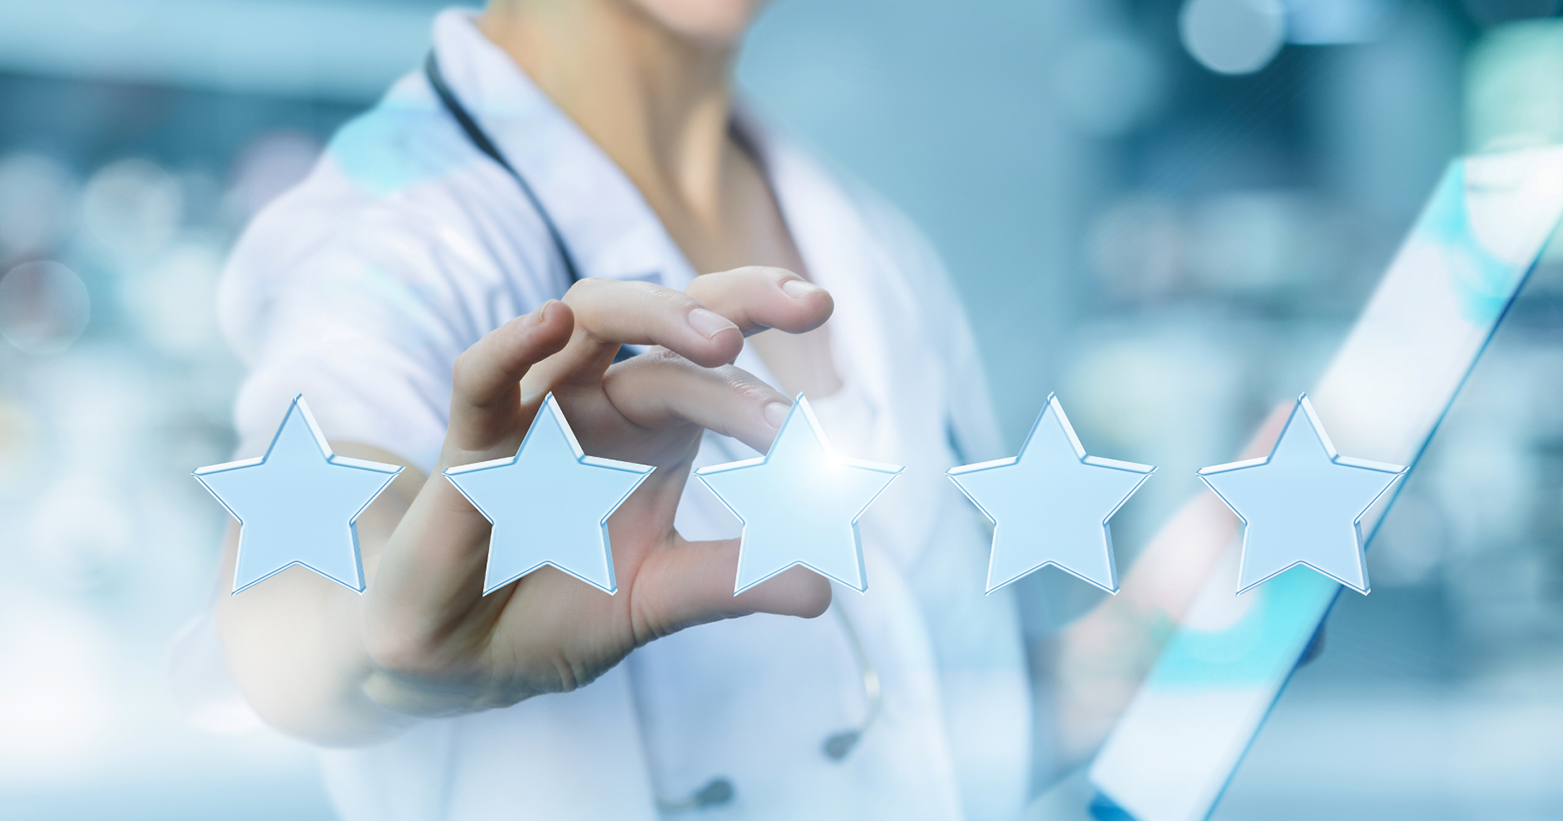 Deerwalk Integrates Provider Quality Ratings to Support Strategic Healthcare Planning